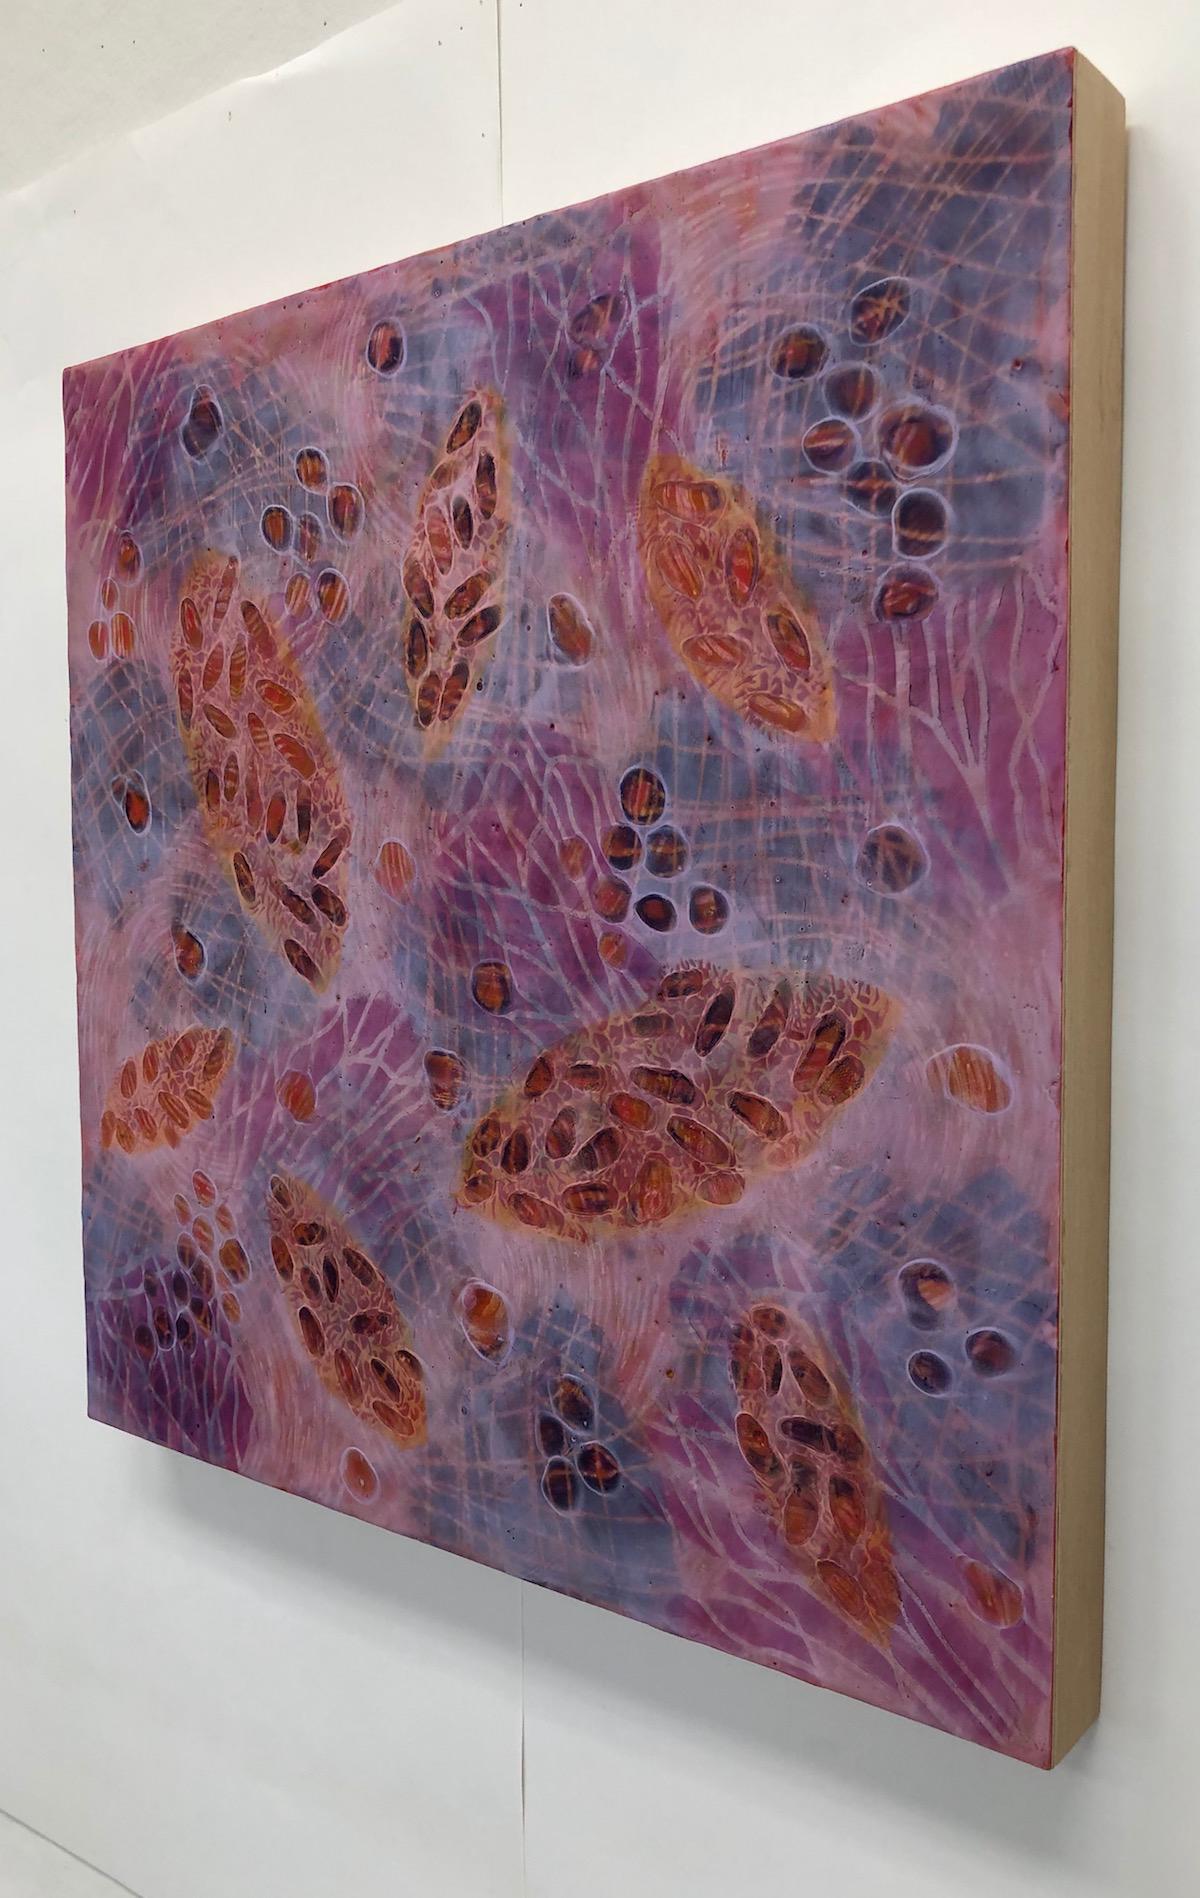 Kay Hartung’s “Bio Patterns 17” is a 20 x 20 x 1.5  inch encaustic painting composed of transparent layers depicting microscopic forms on a richly patterned background. In colors of pink, orange, purple and white, the transparent layers create a